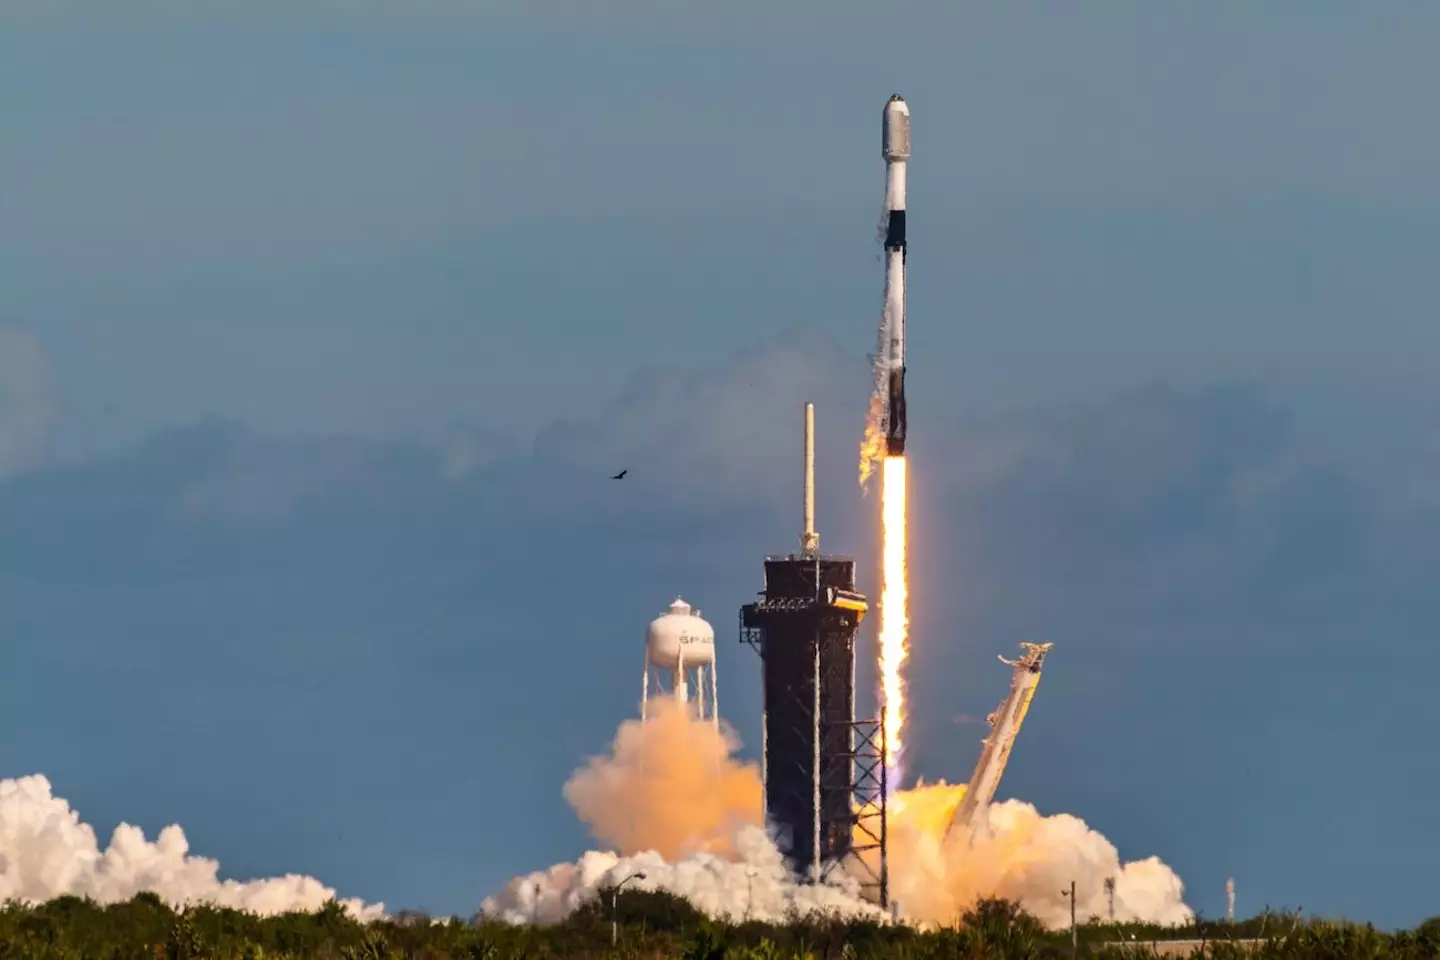 A Falcon 9 rocket carrying 49 Starlink satellites took off last Thursday.